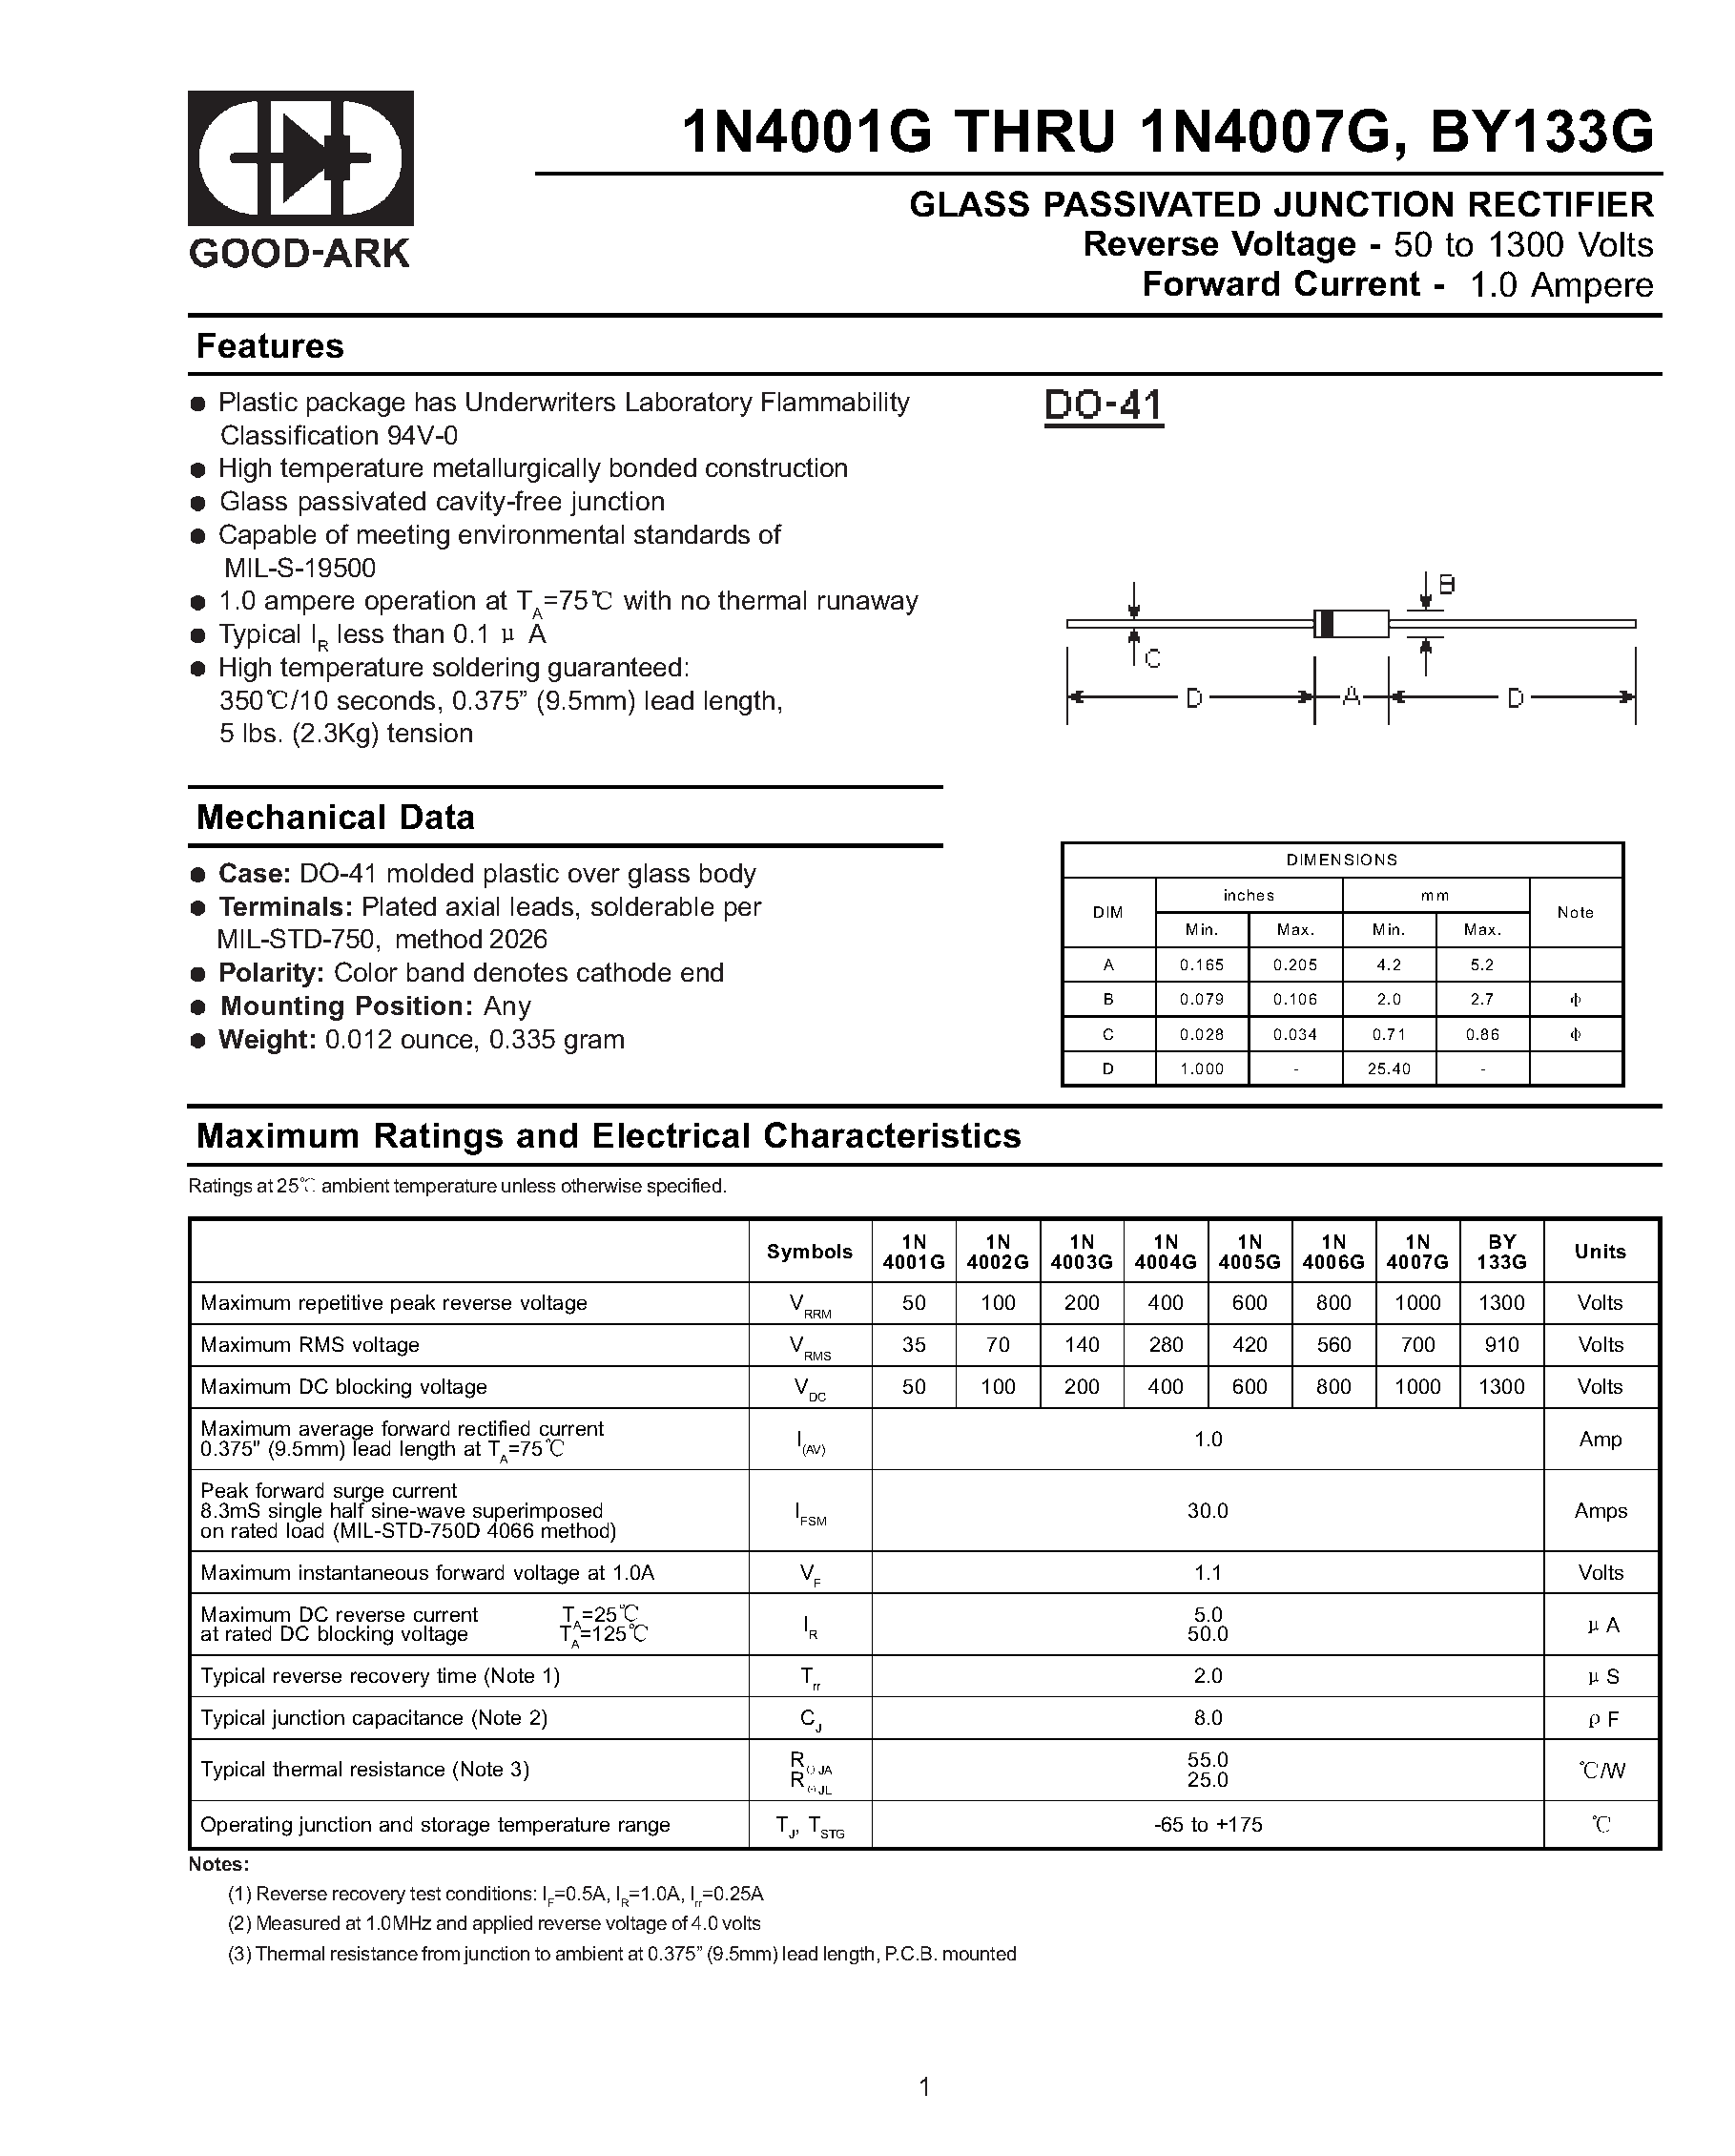 Datasheet BY133G - GLASS PASSIVATED JUNCTION RECTIFIER page 1